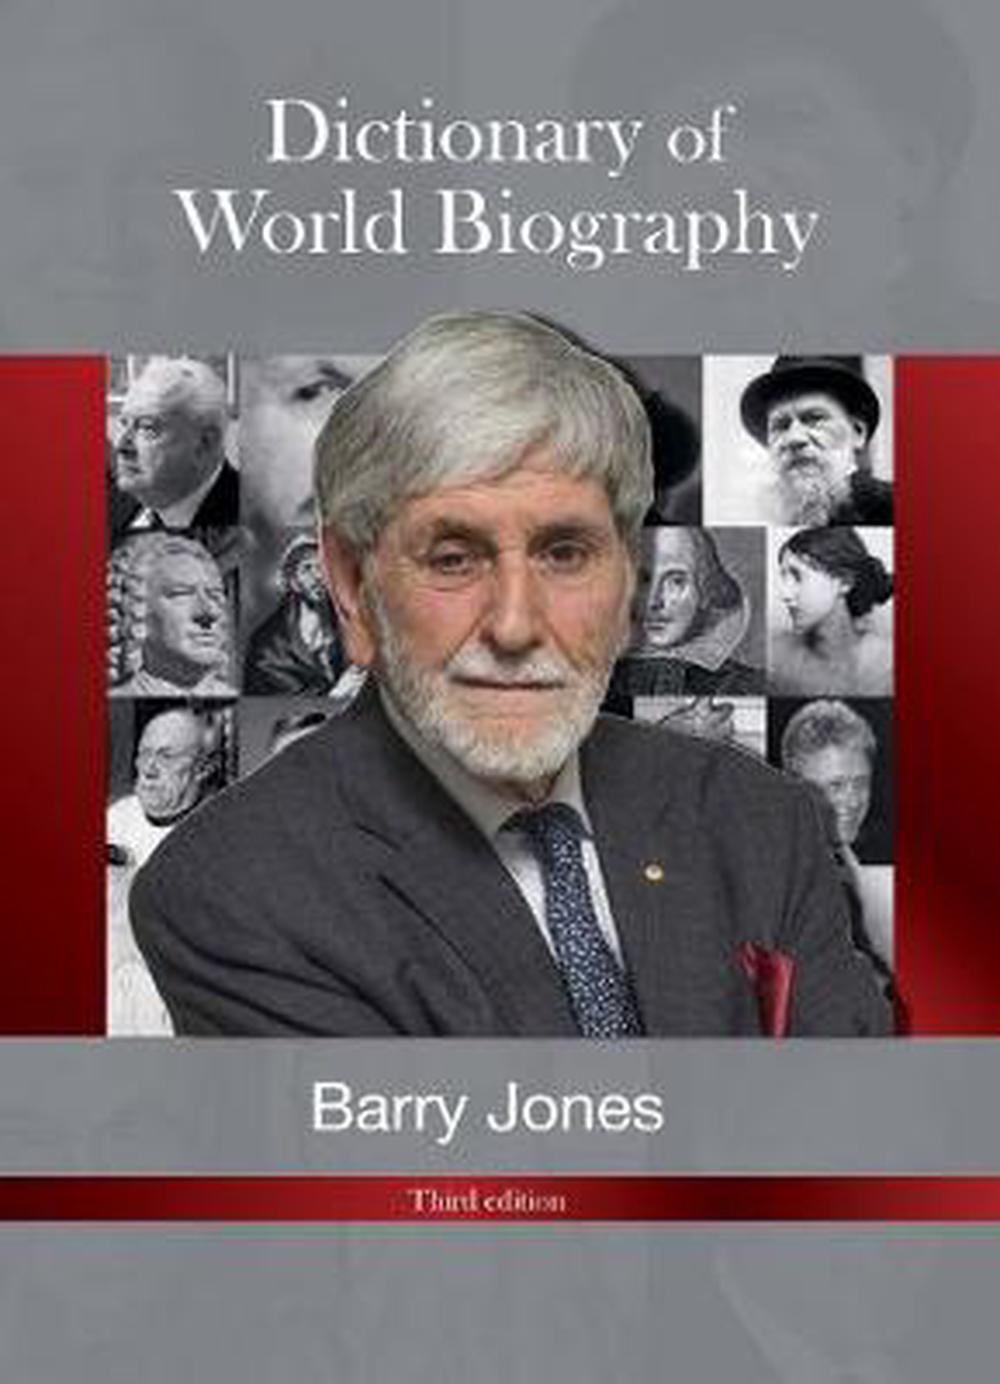 Dictionary of World Biography: Third Edition by Barry Jone Hardcover ...